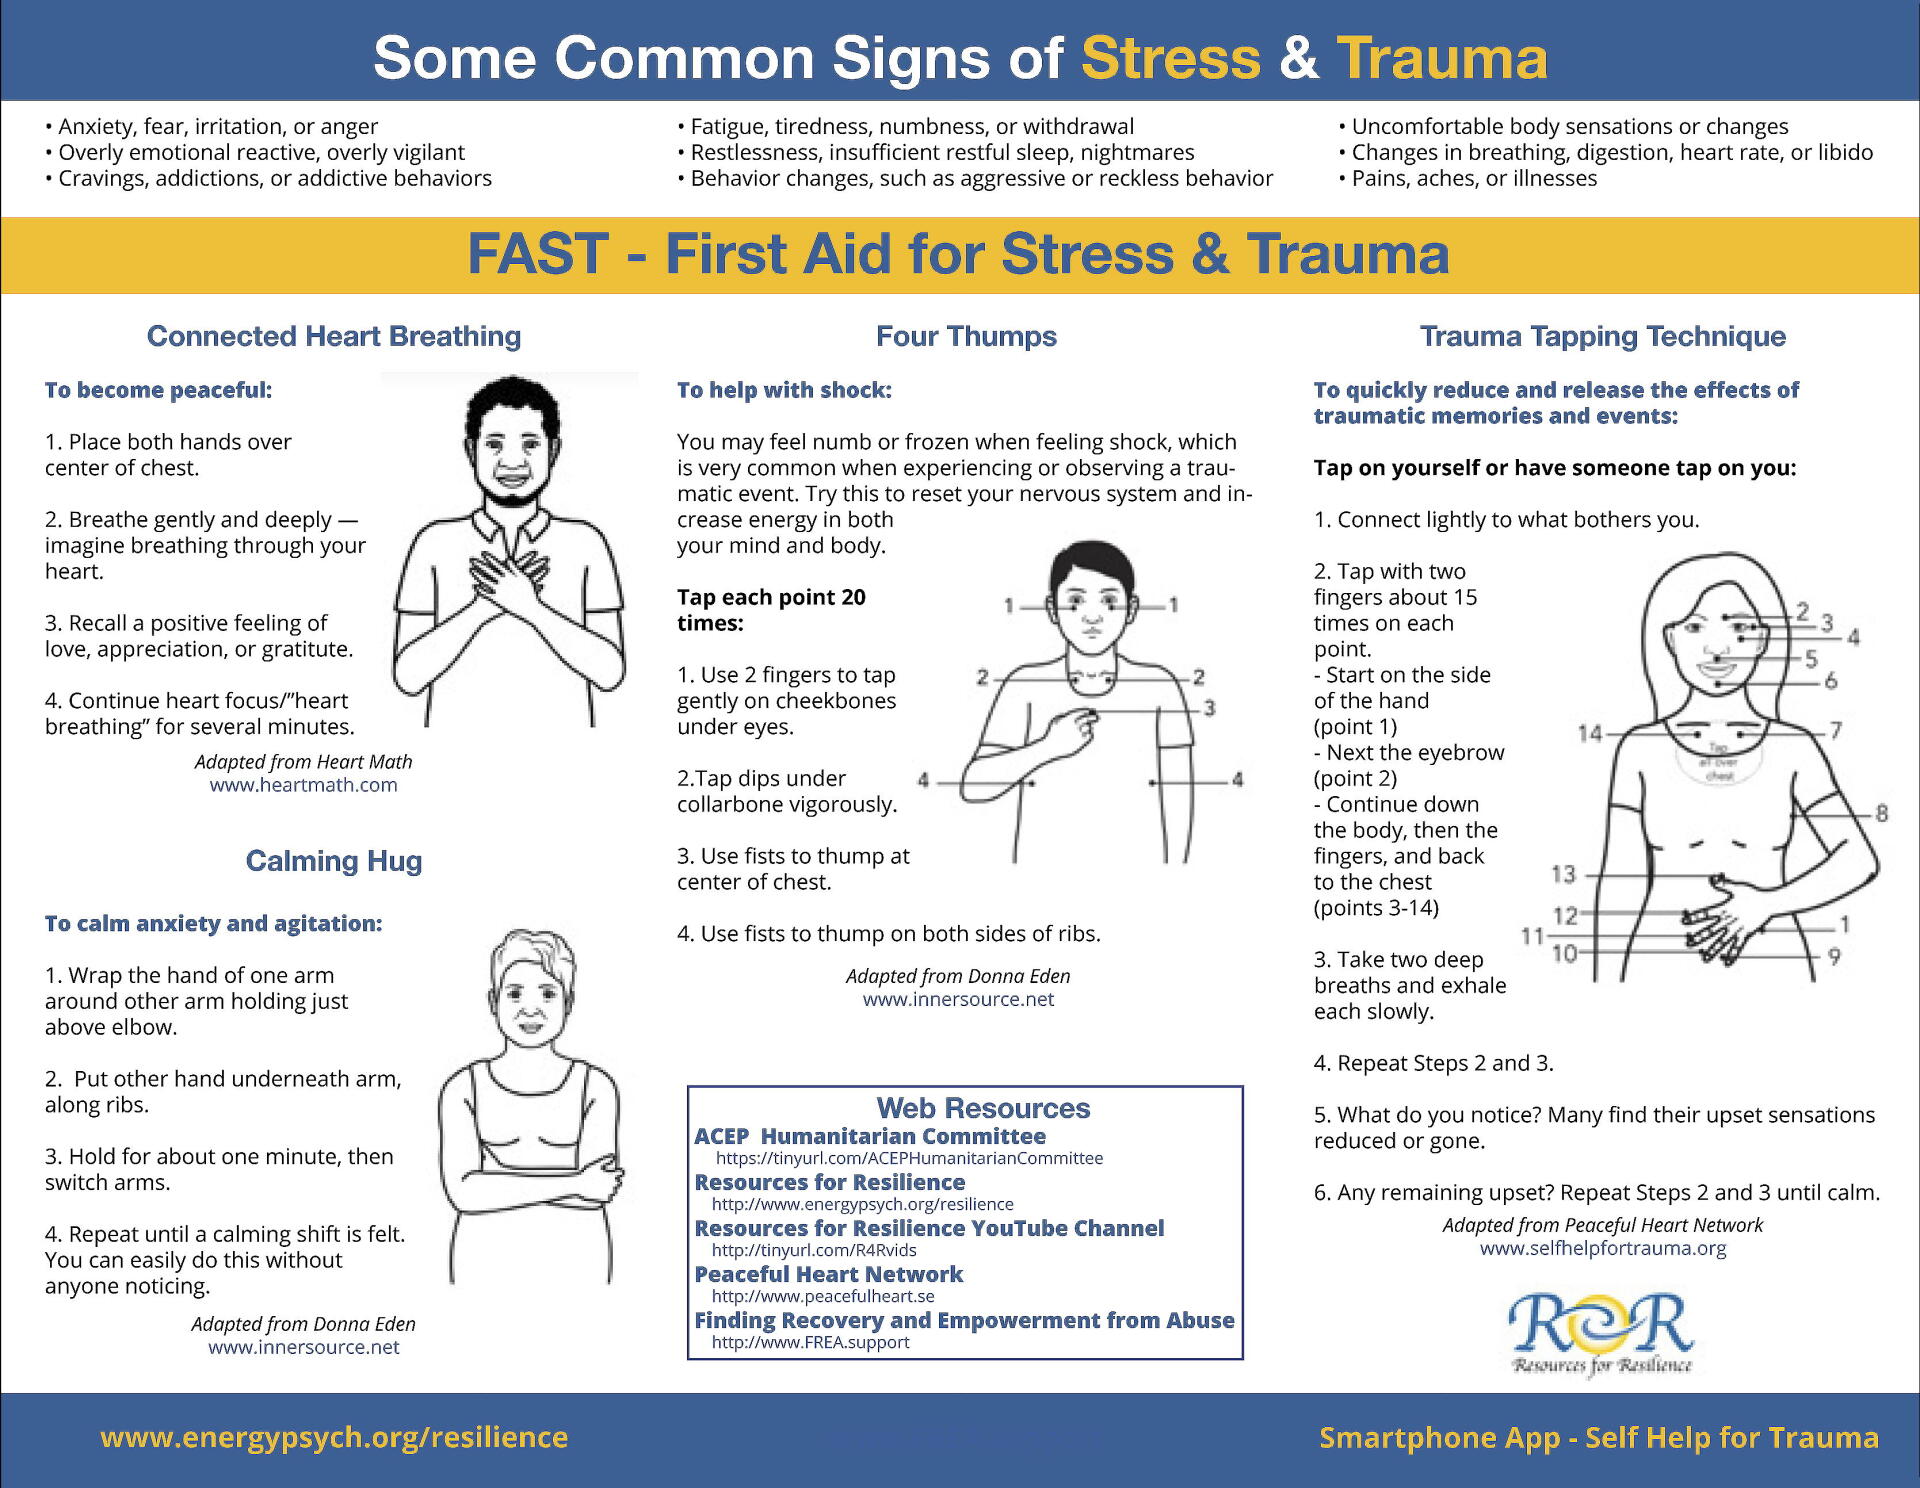 First Aid for Stress and Trauma exercises